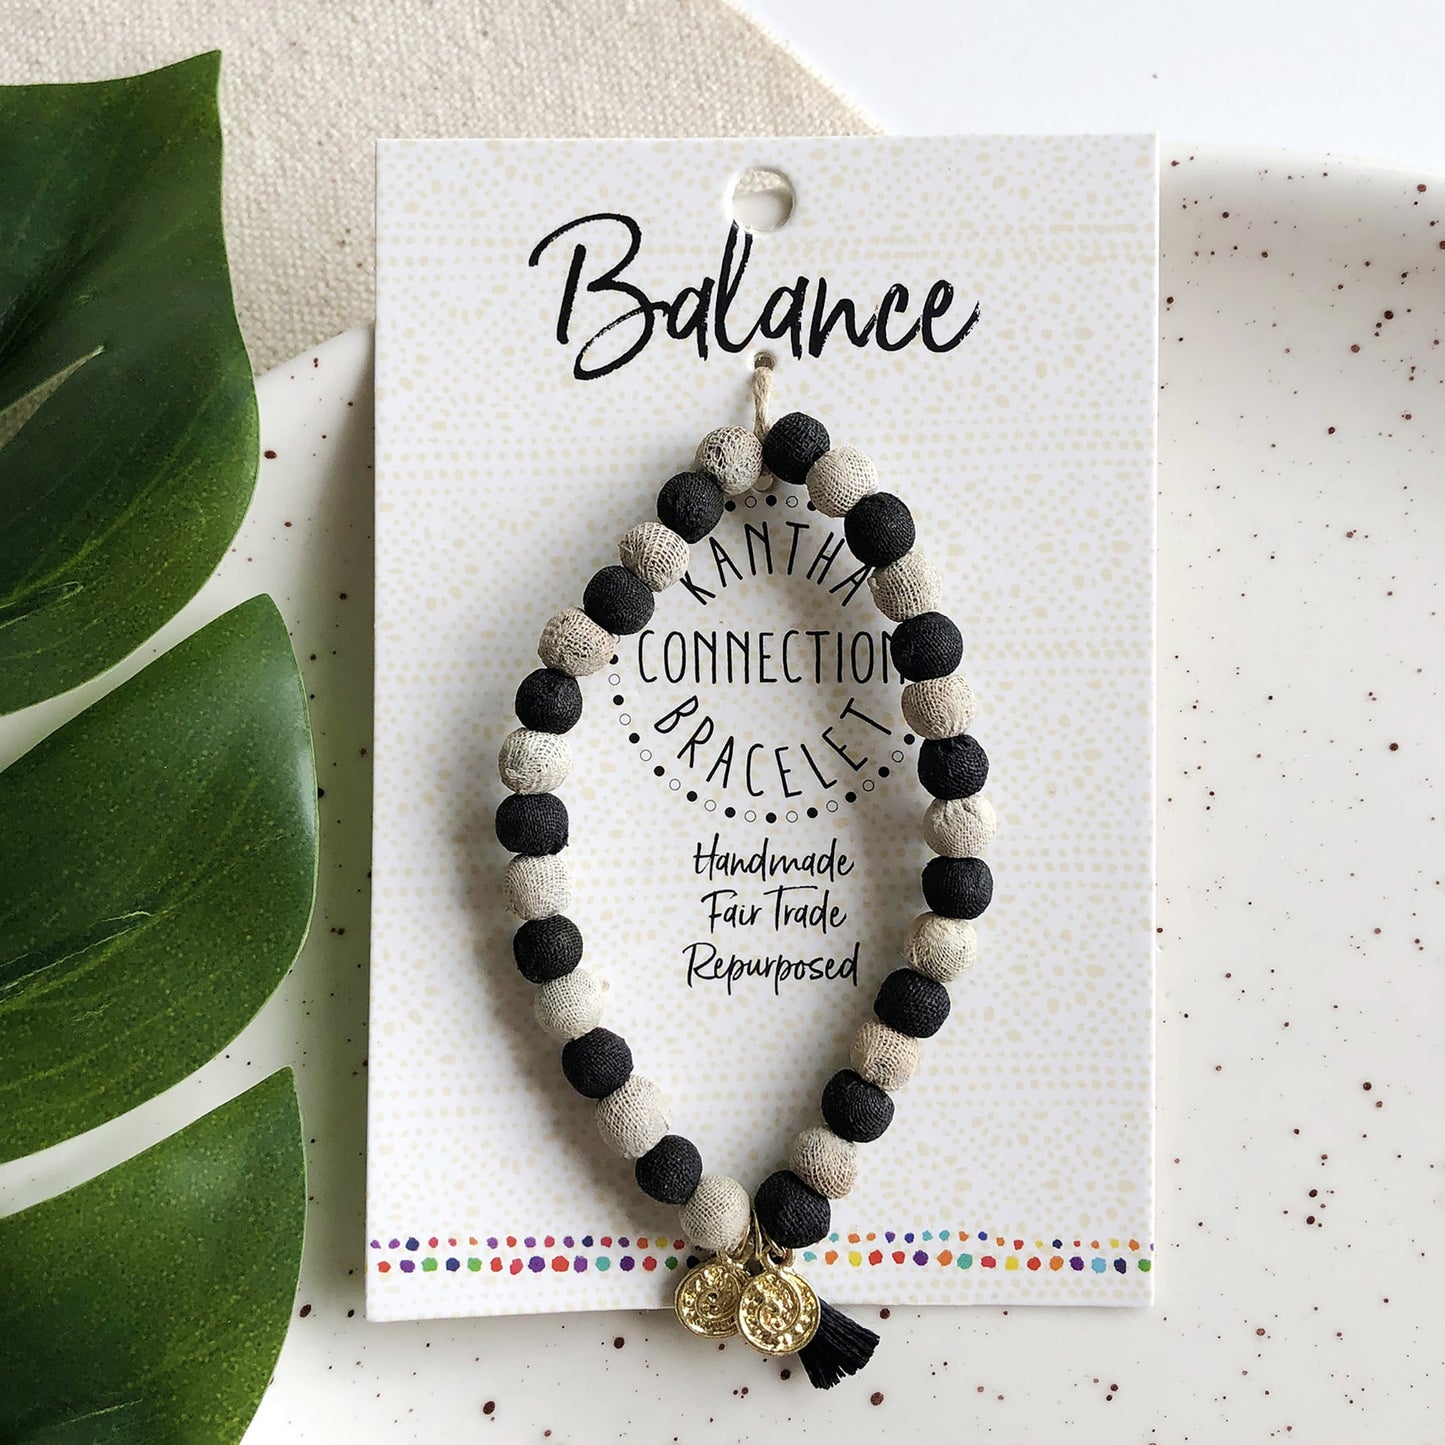 A black and white beaded bracelet tied to a card that reads "Balance"